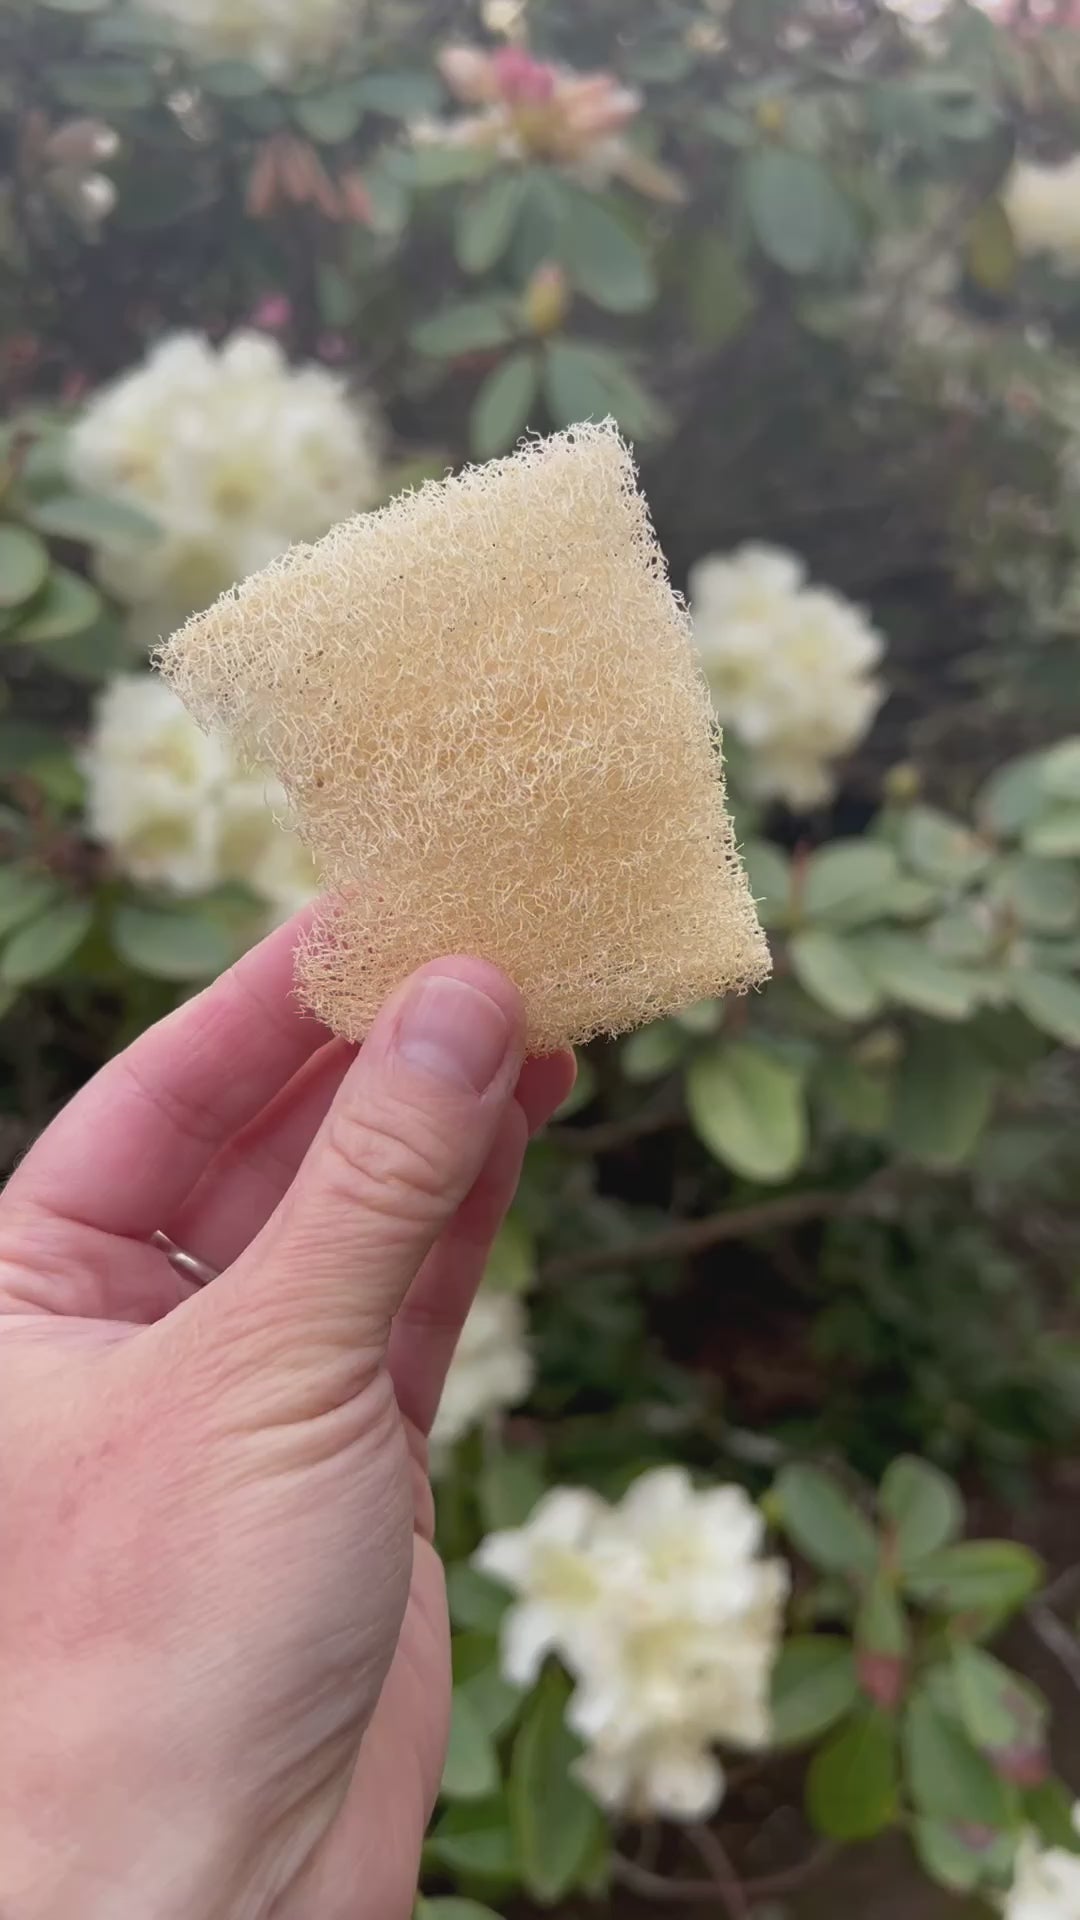 Fawn Lily Botanica | video of the softest facial luffa loofah - organic sustainably grown in USA - benefits of luffa sponges for skin